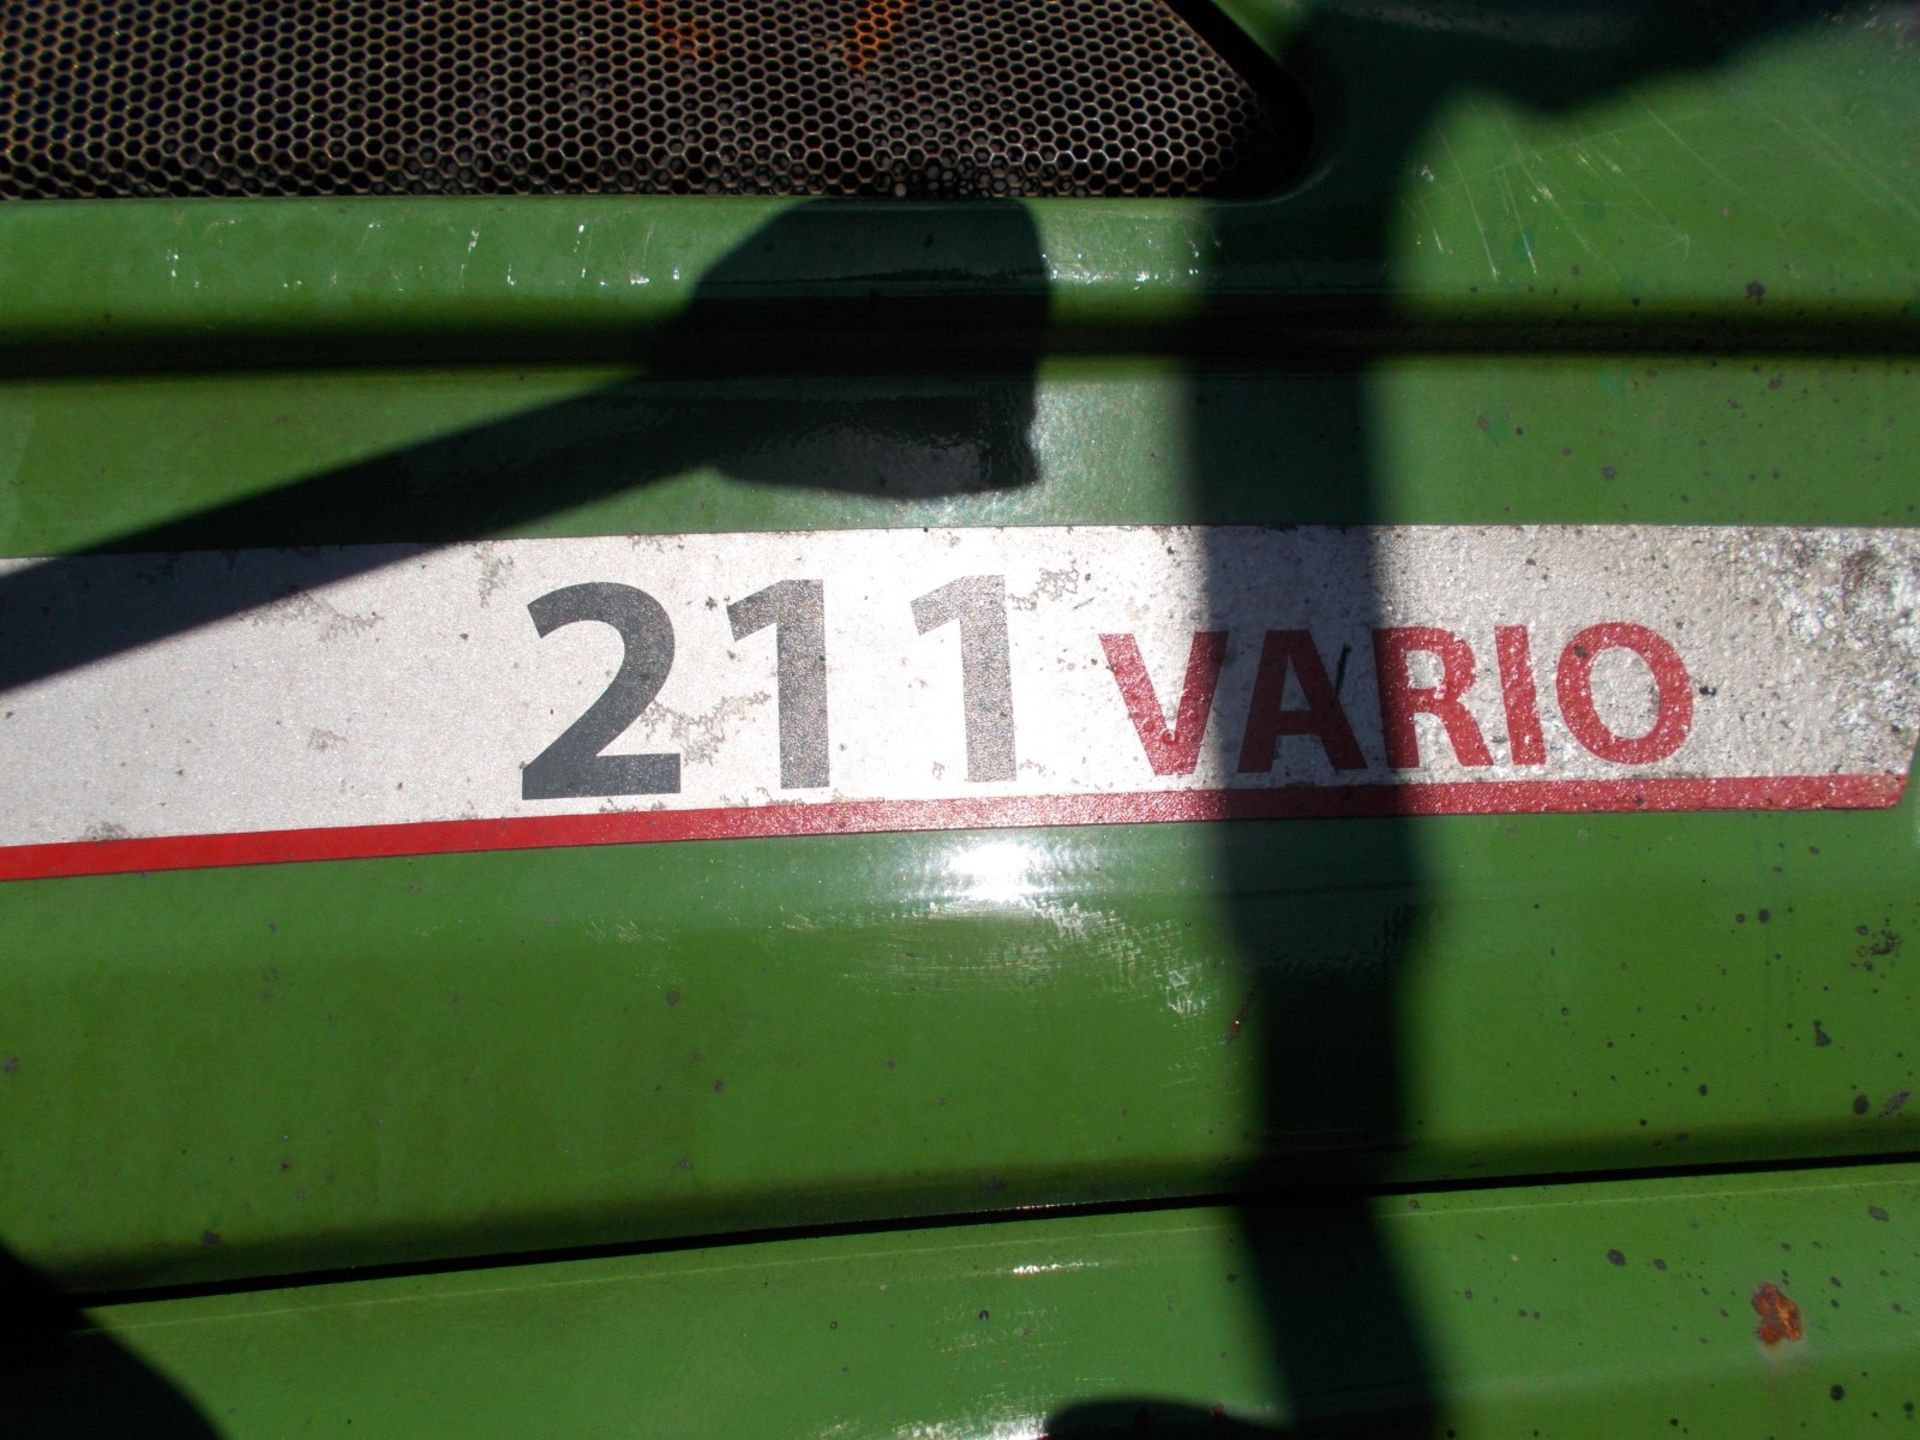 2020 FENDT 211 VARIO AGRICULTURAL TRACTOR, 3.3 LITRE 3 CYL DIESEL, FIRE DAMAGE TO CAB AREA *PLUS VAT - Image 9 of 13